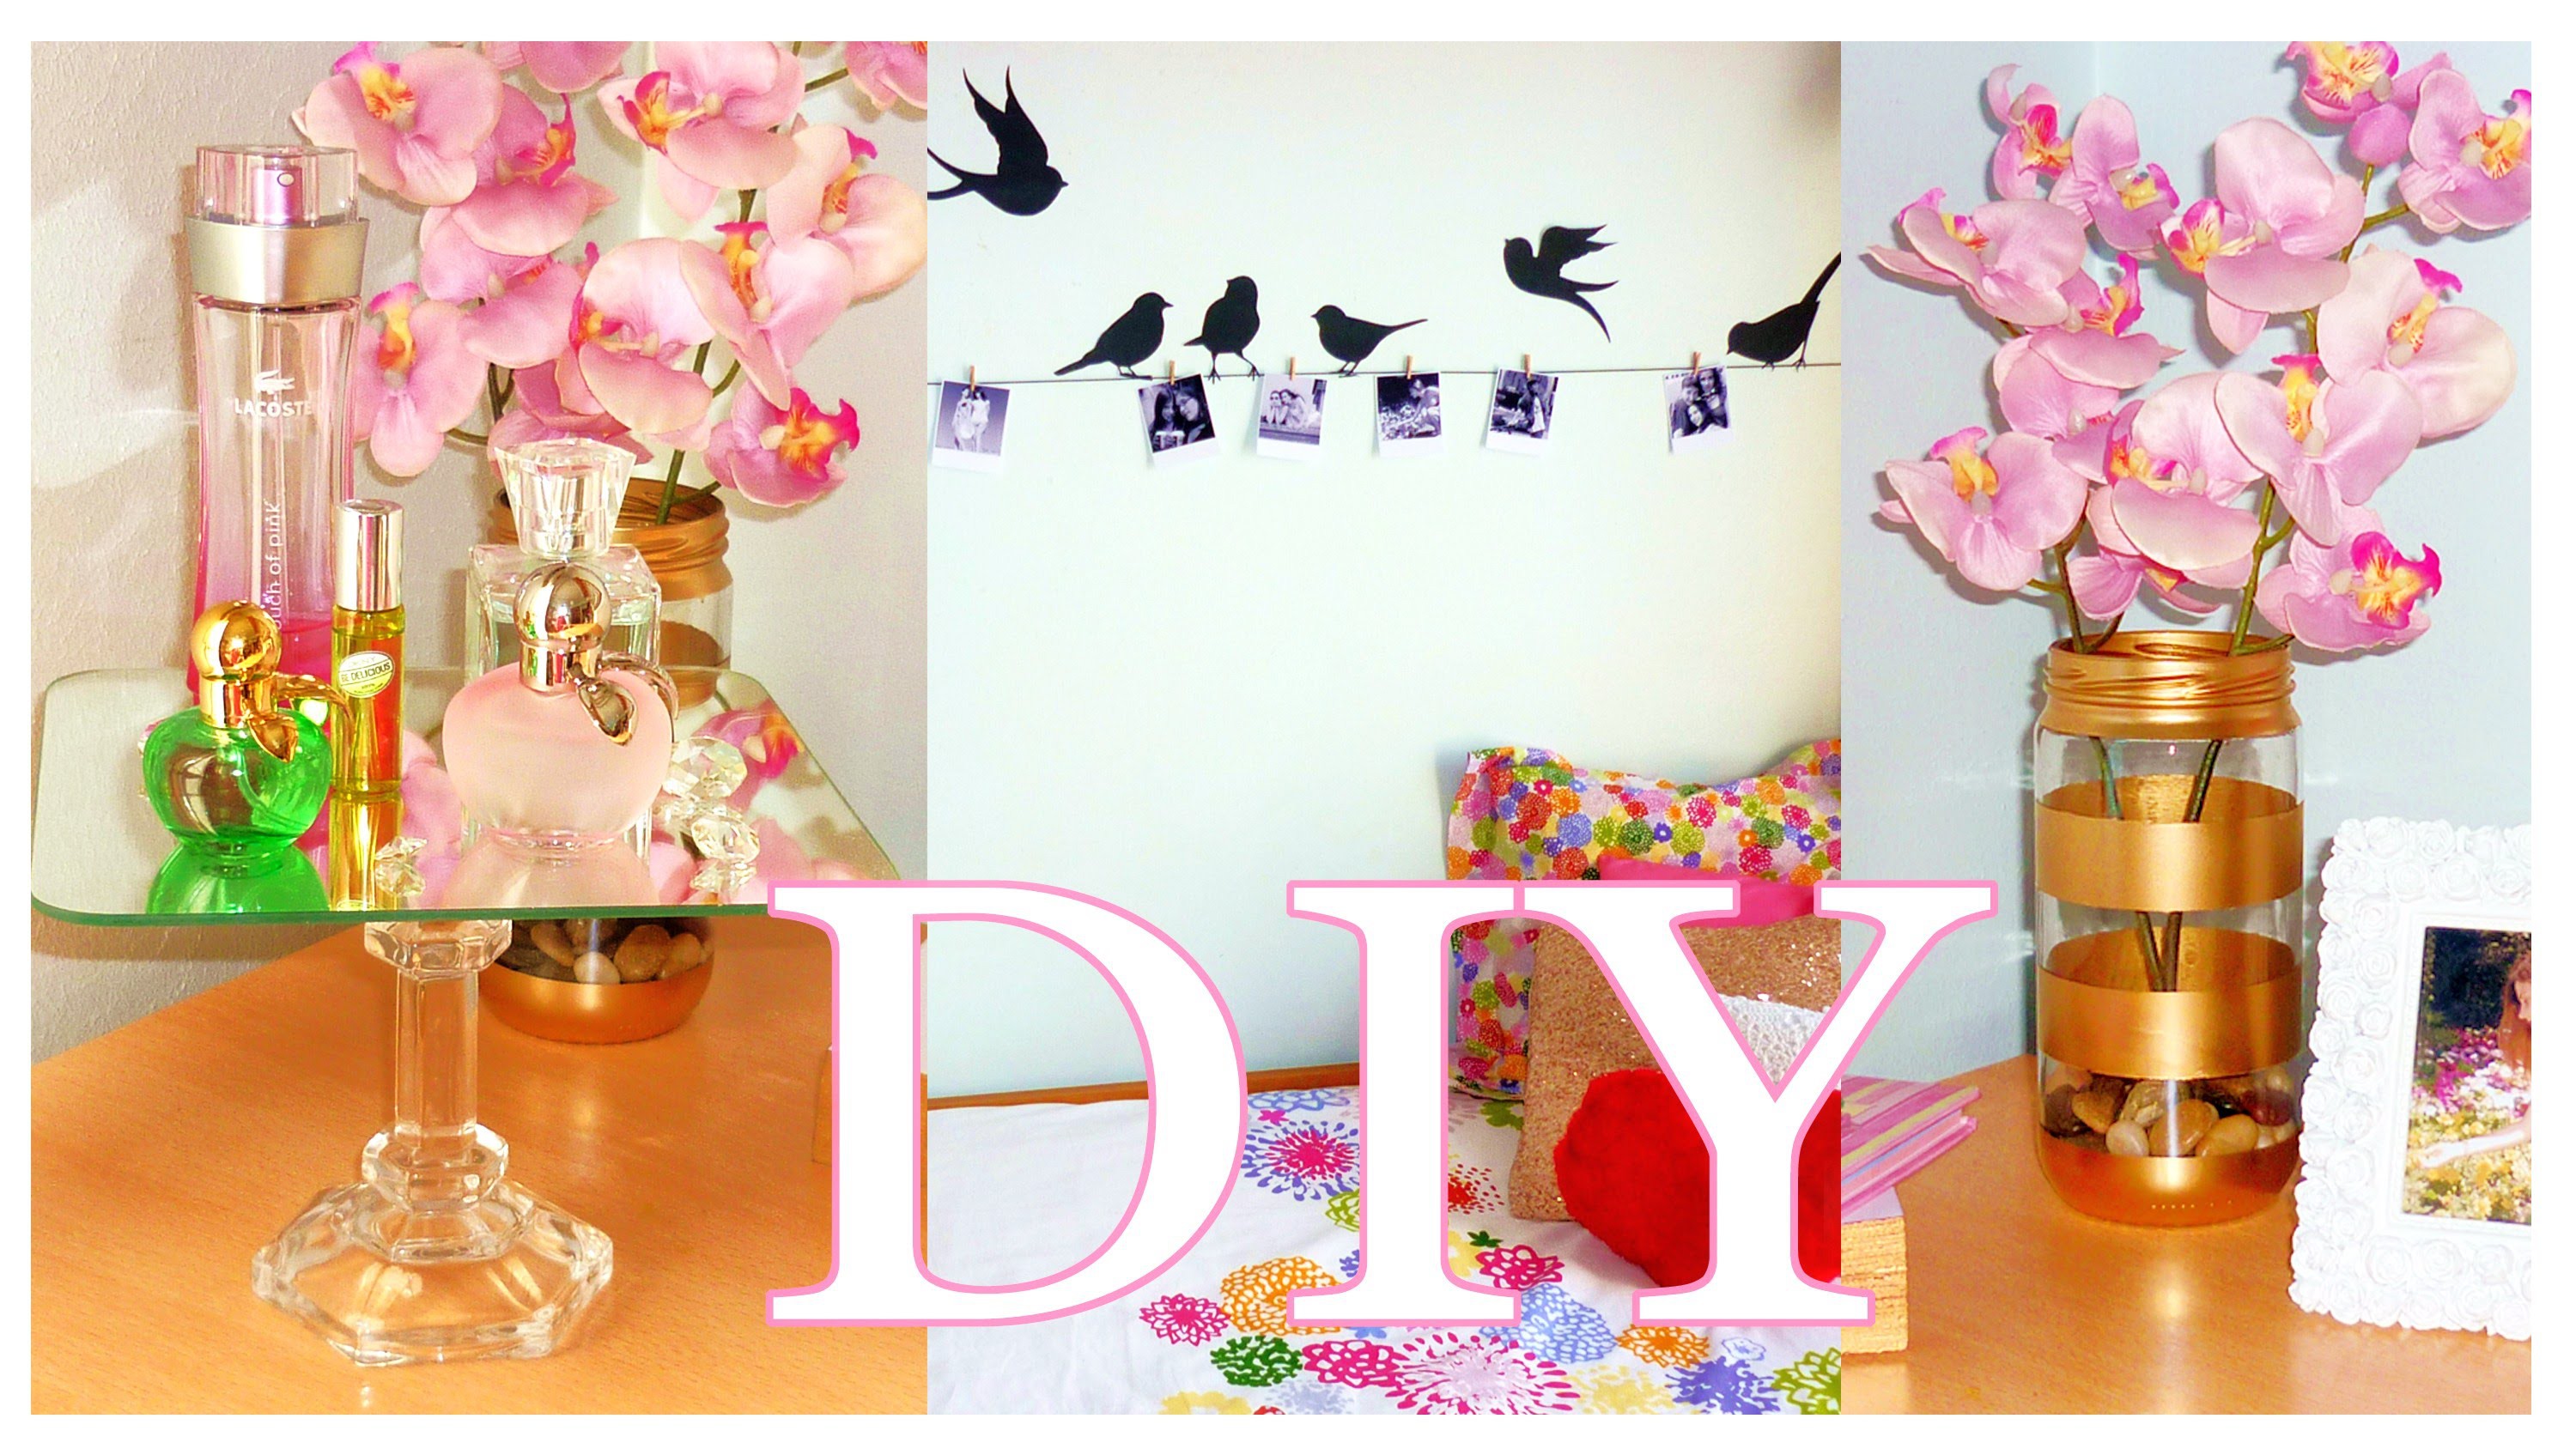 DIY ROOM DECOR Cheap & cute projects, LOW COST ideas!!